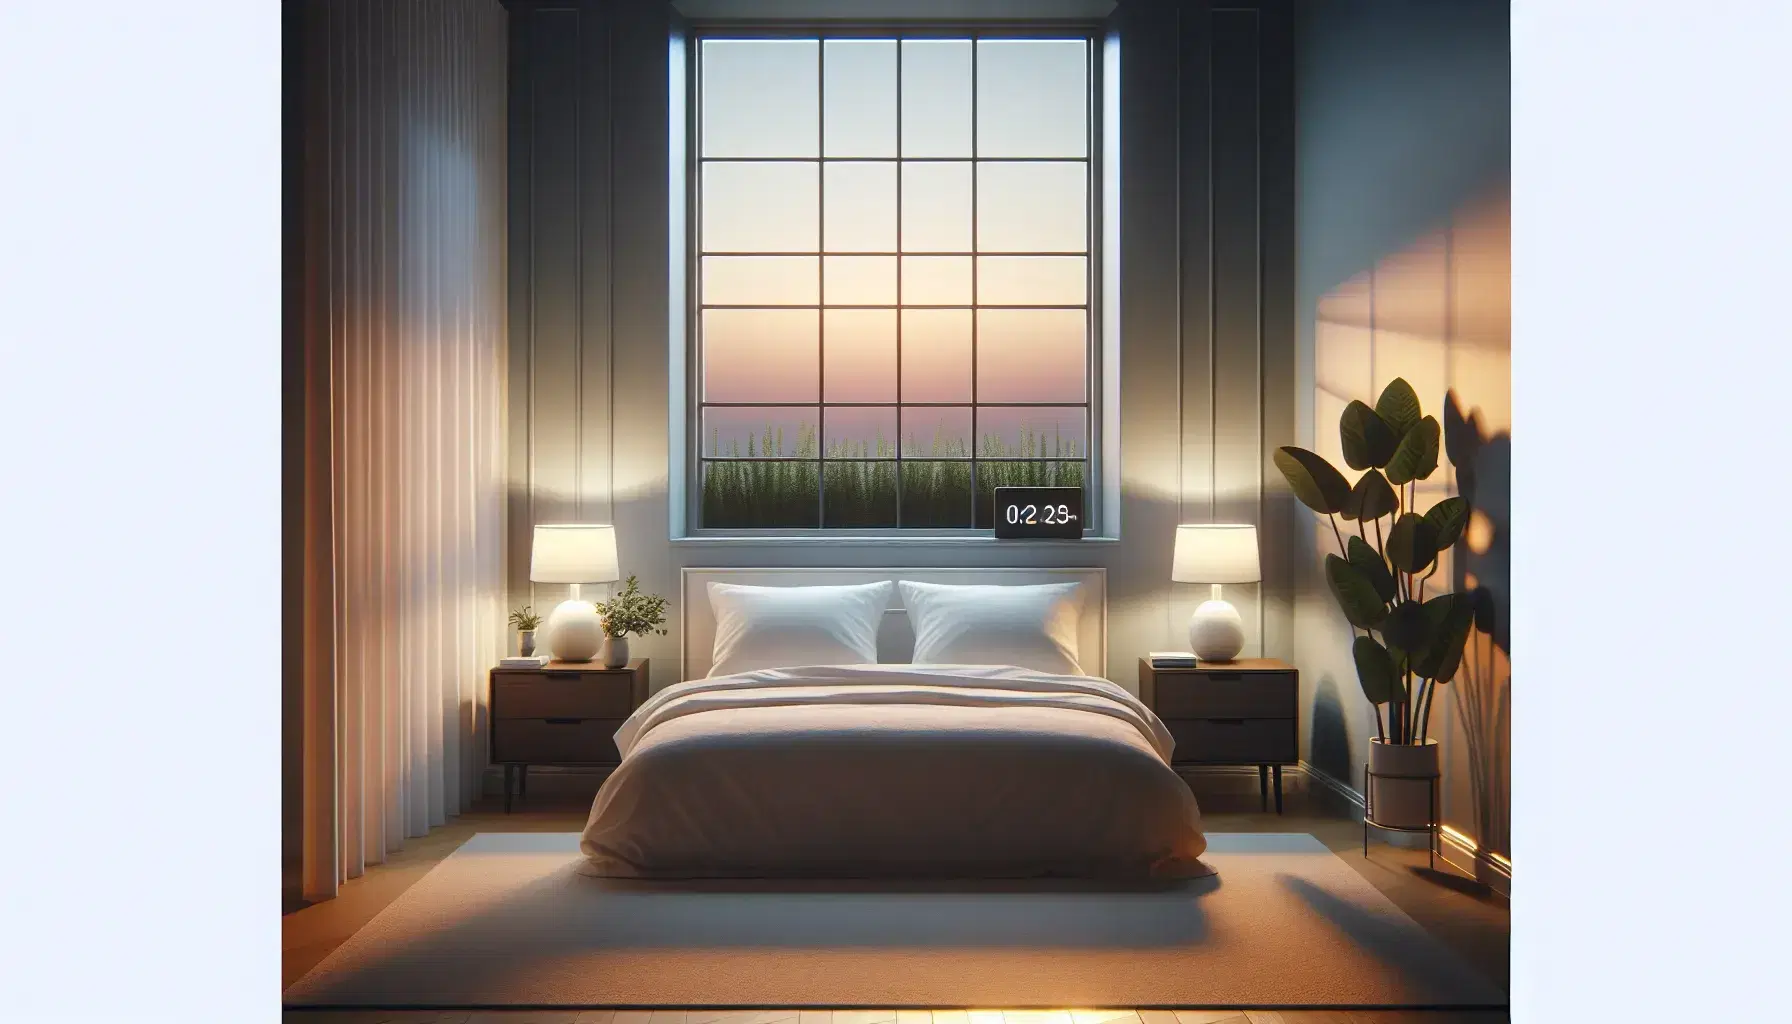 Serene bedroom at dusk with a made bed, white blanket, soft pillows, dark wood bedside tables, unlit lamps and white curtains filtering the sunset light.